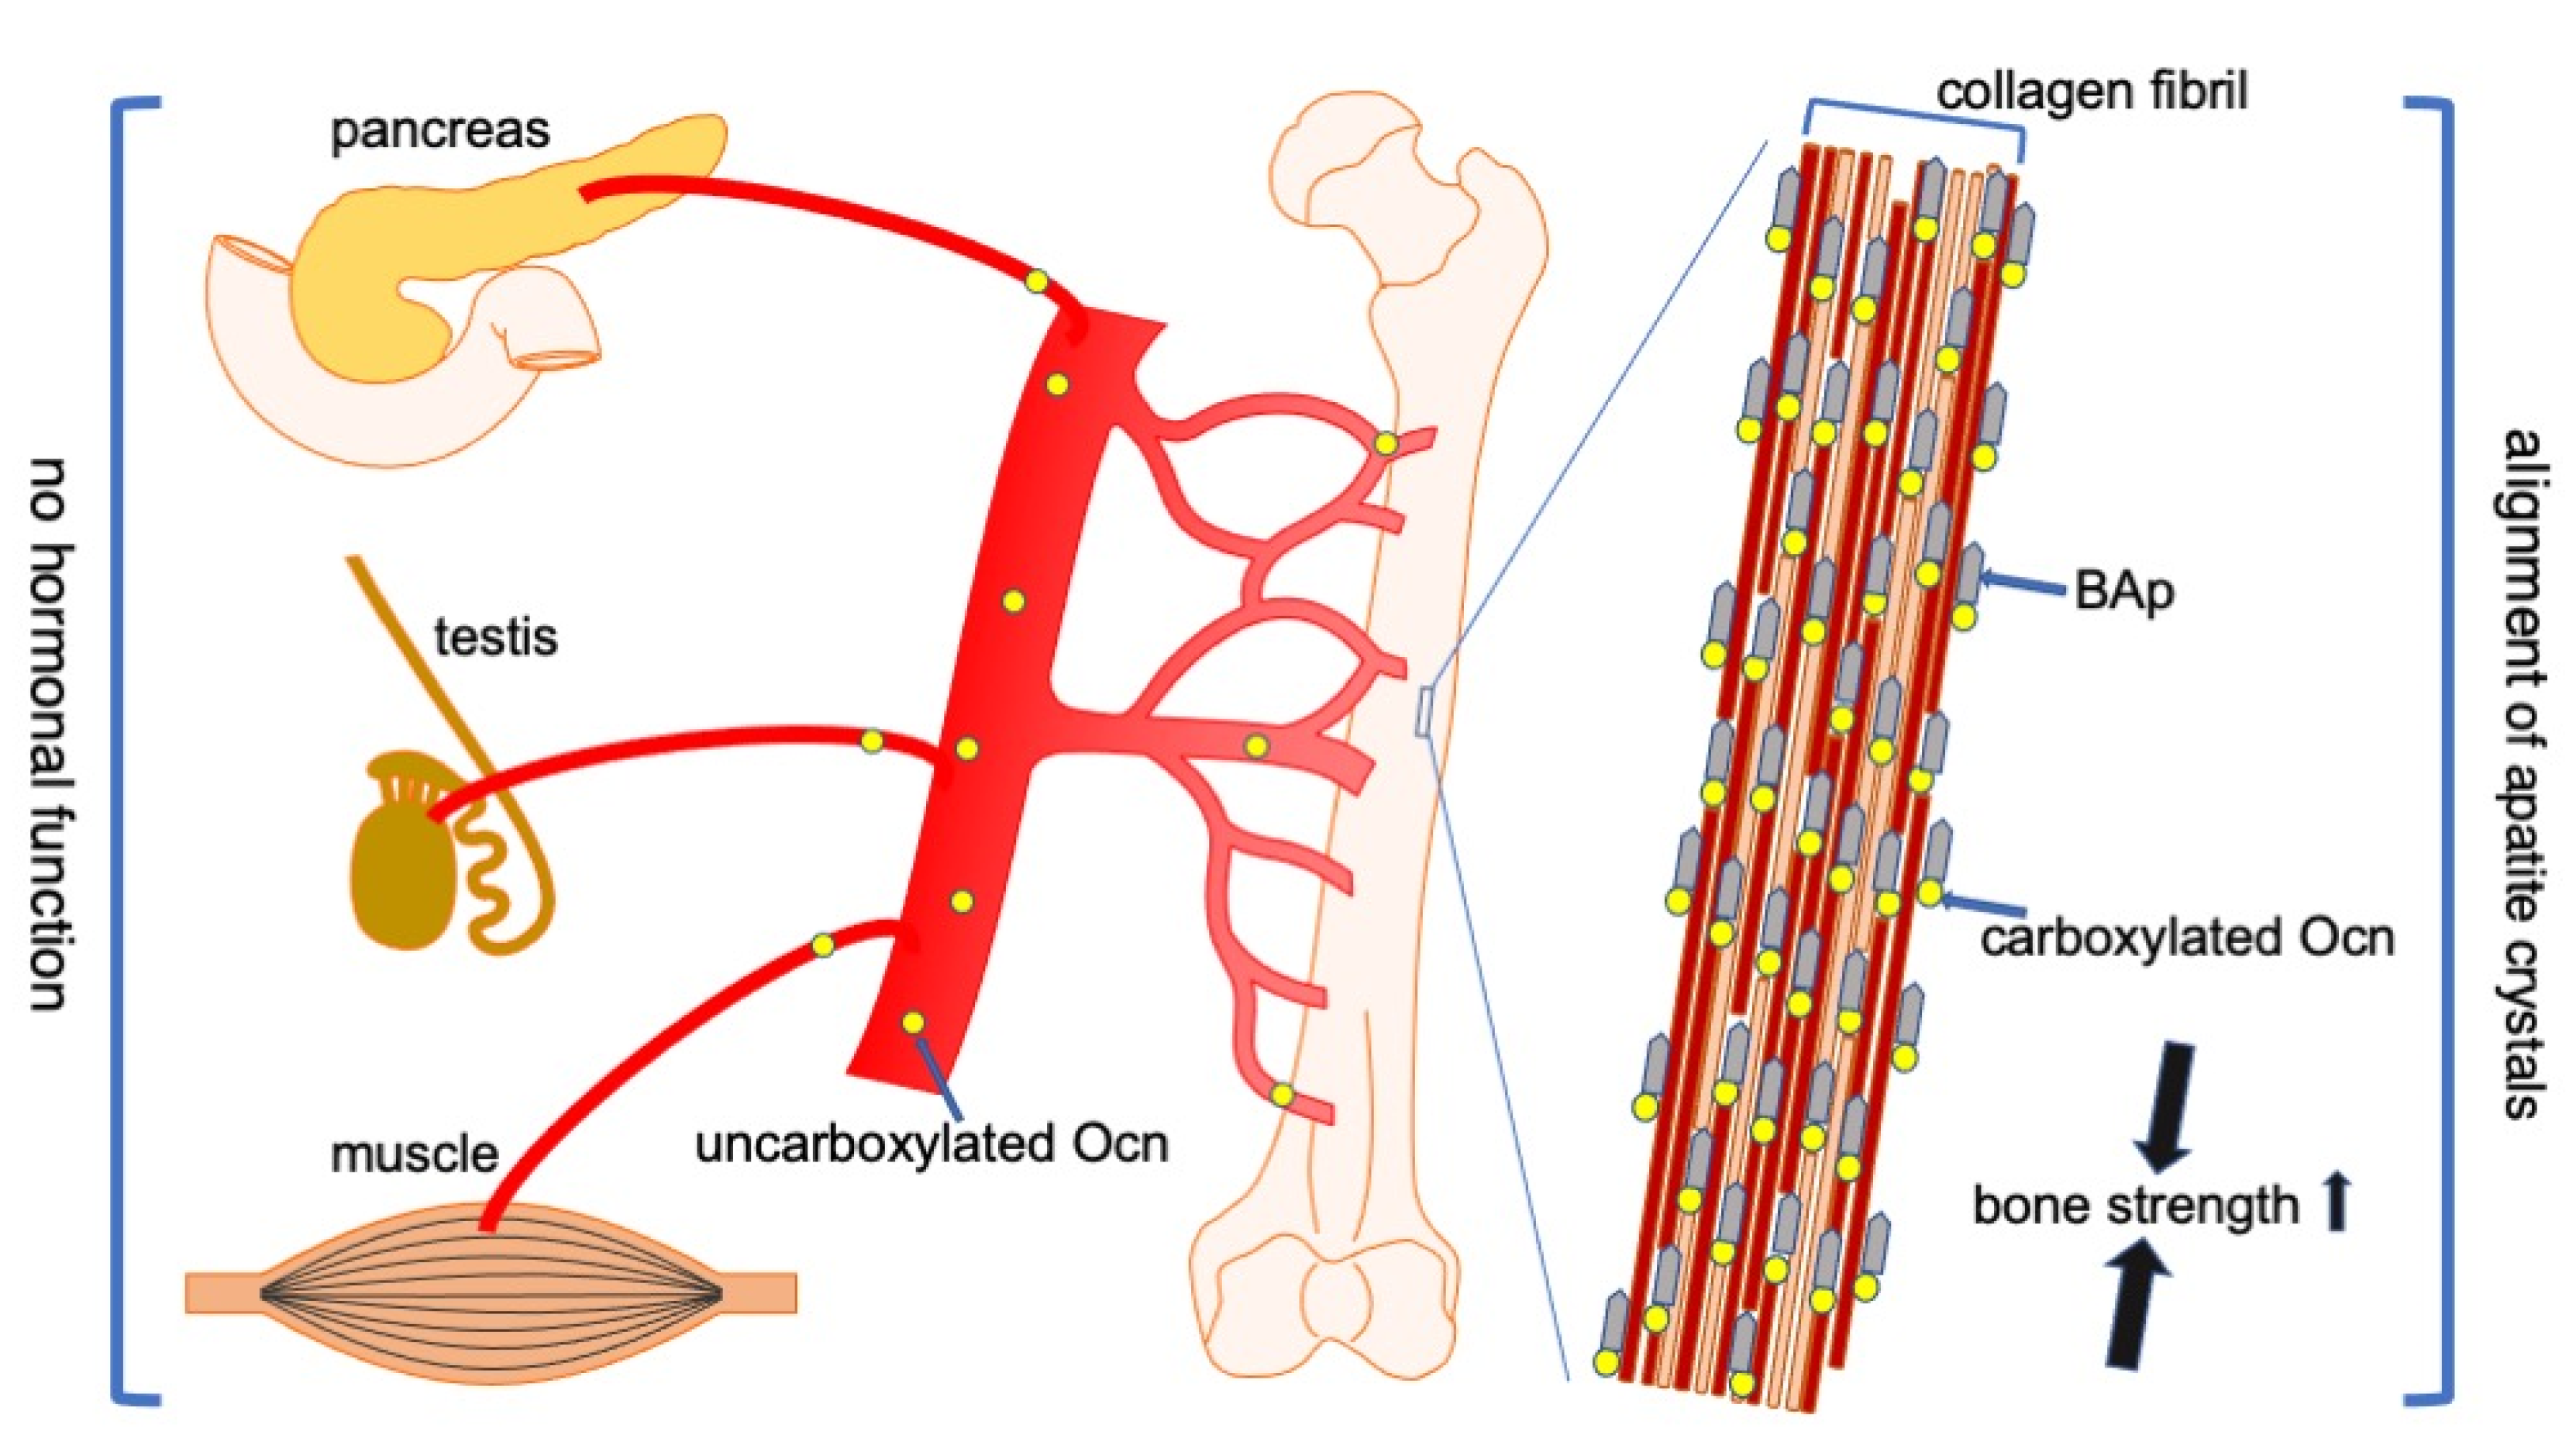 IJMS | Free Full-Text | Functions of Osteocalcin in Bone, Pancreas, Testis,  and Muscle